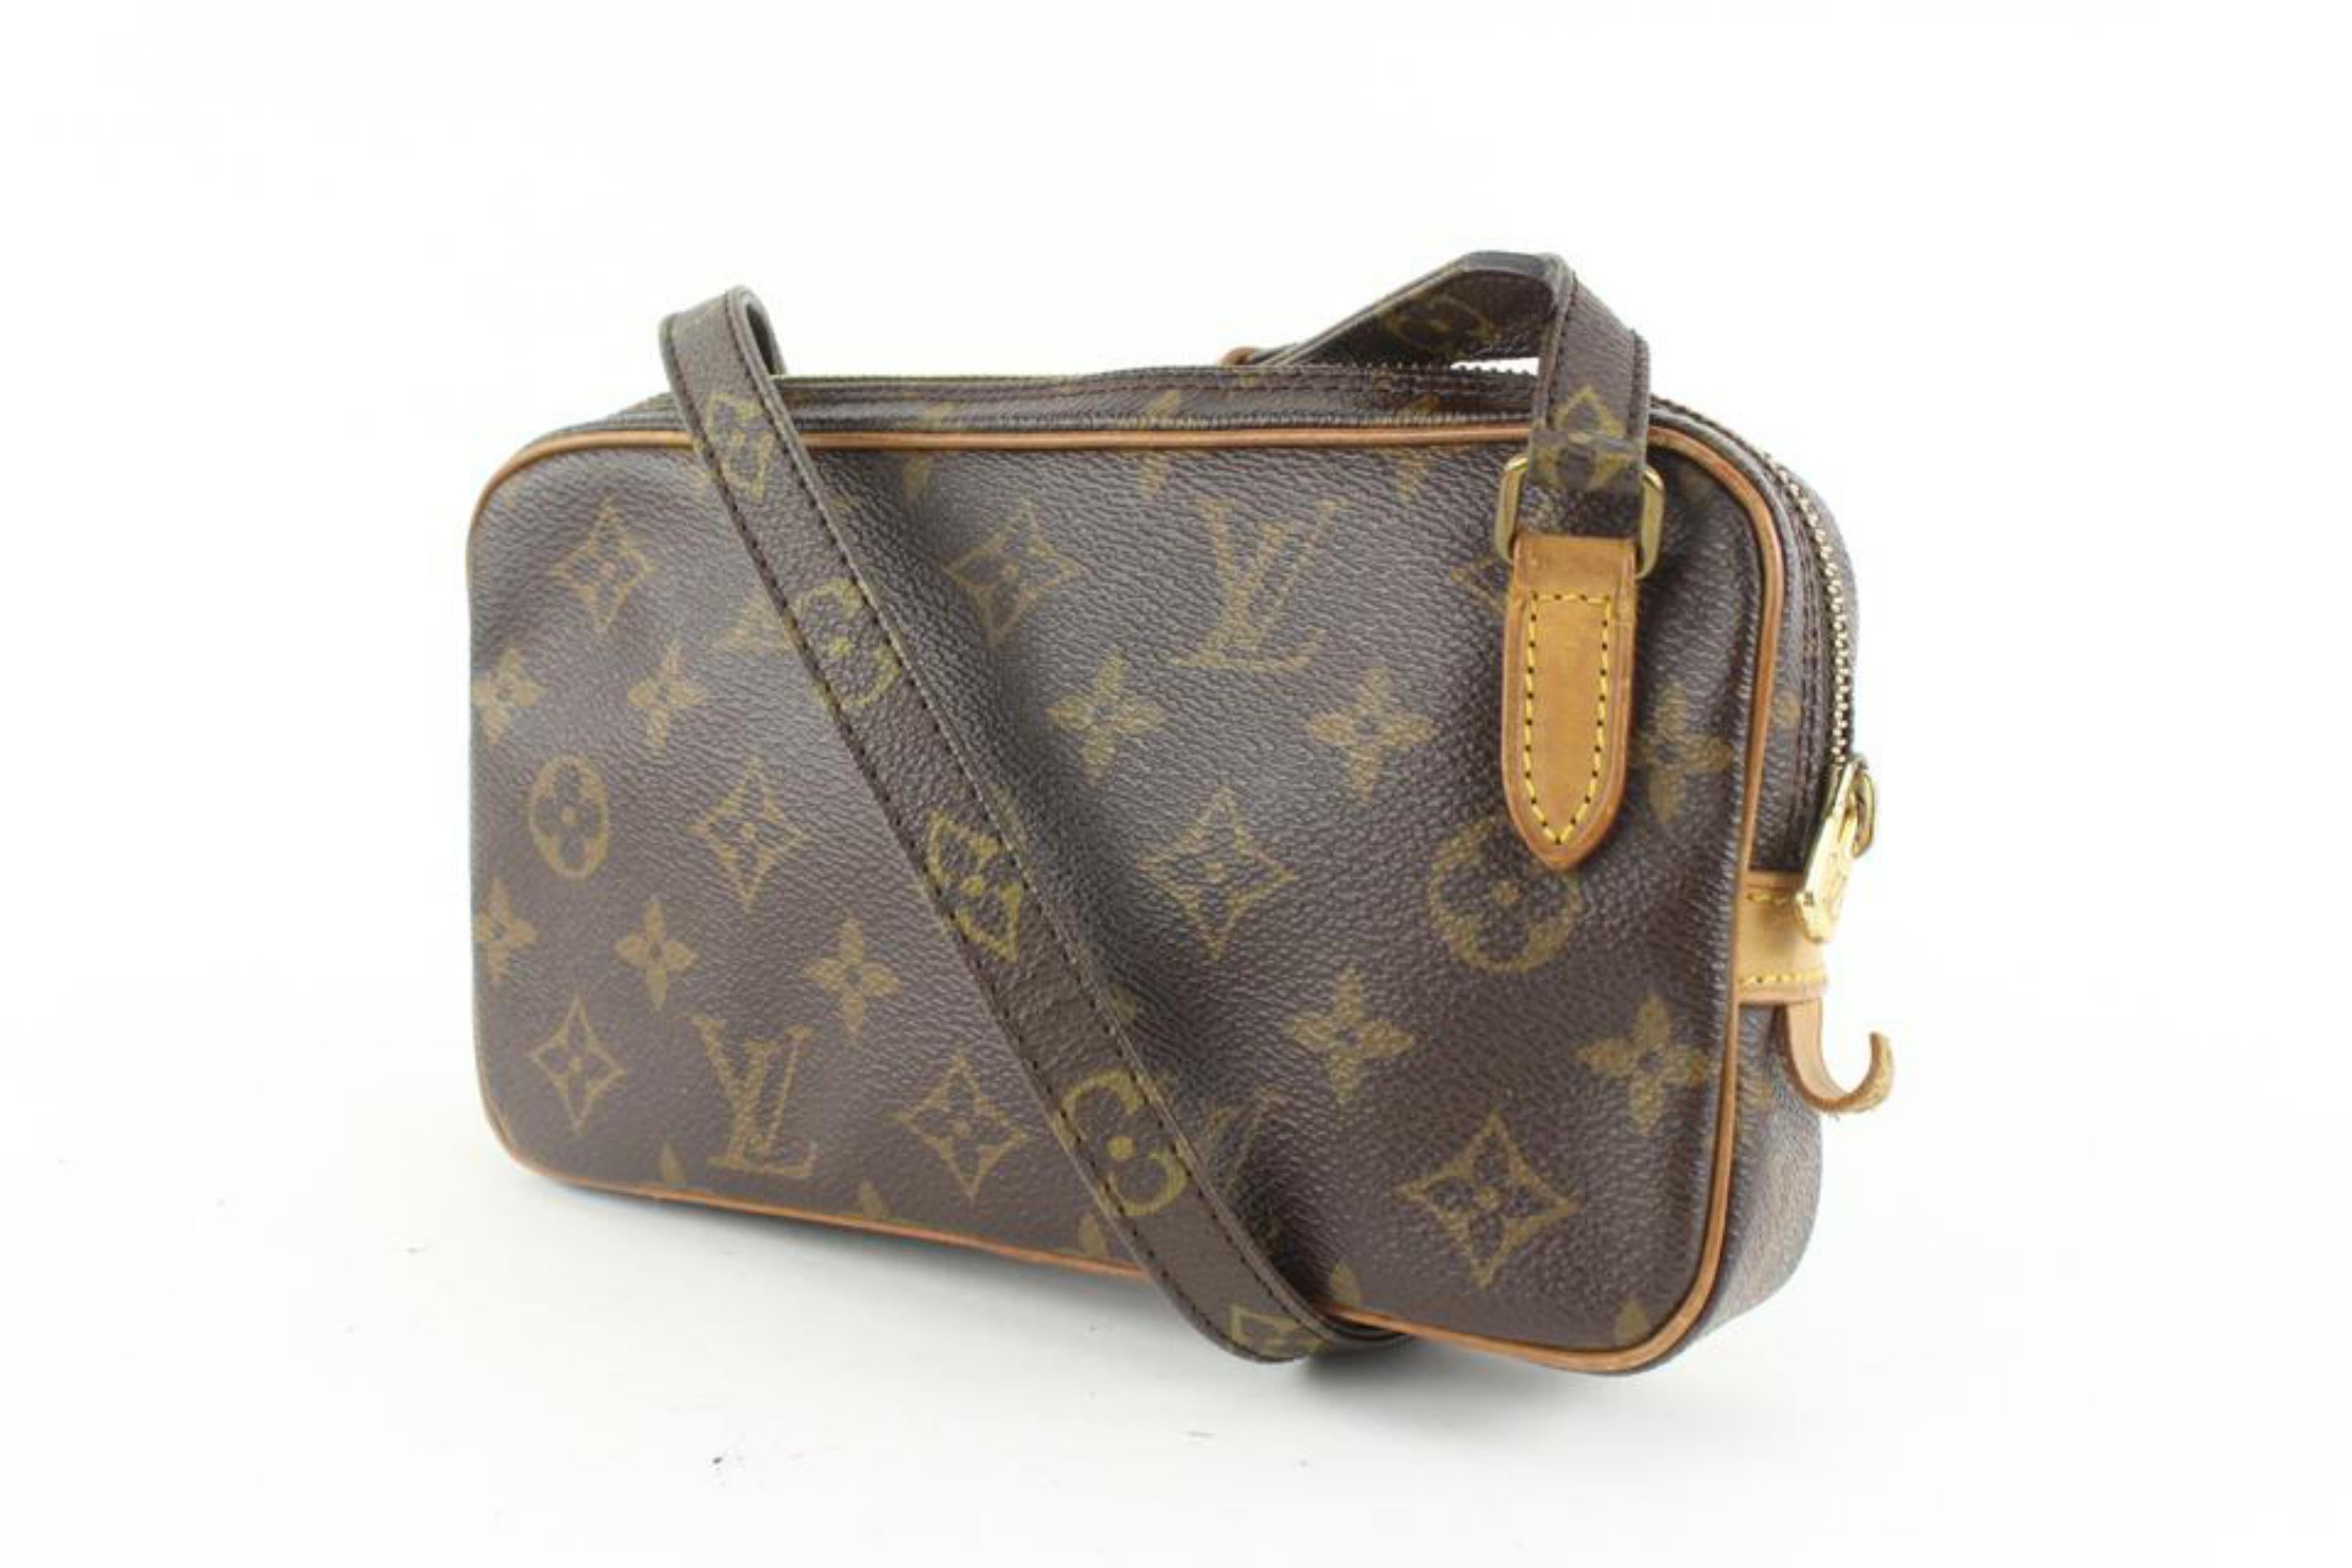 Louis Vuitton Monogram Pochette Marly Bandouliere 16lv33
Date Code/Serial Number: TH0991
Made In: France
Measurements: Length:  8.5